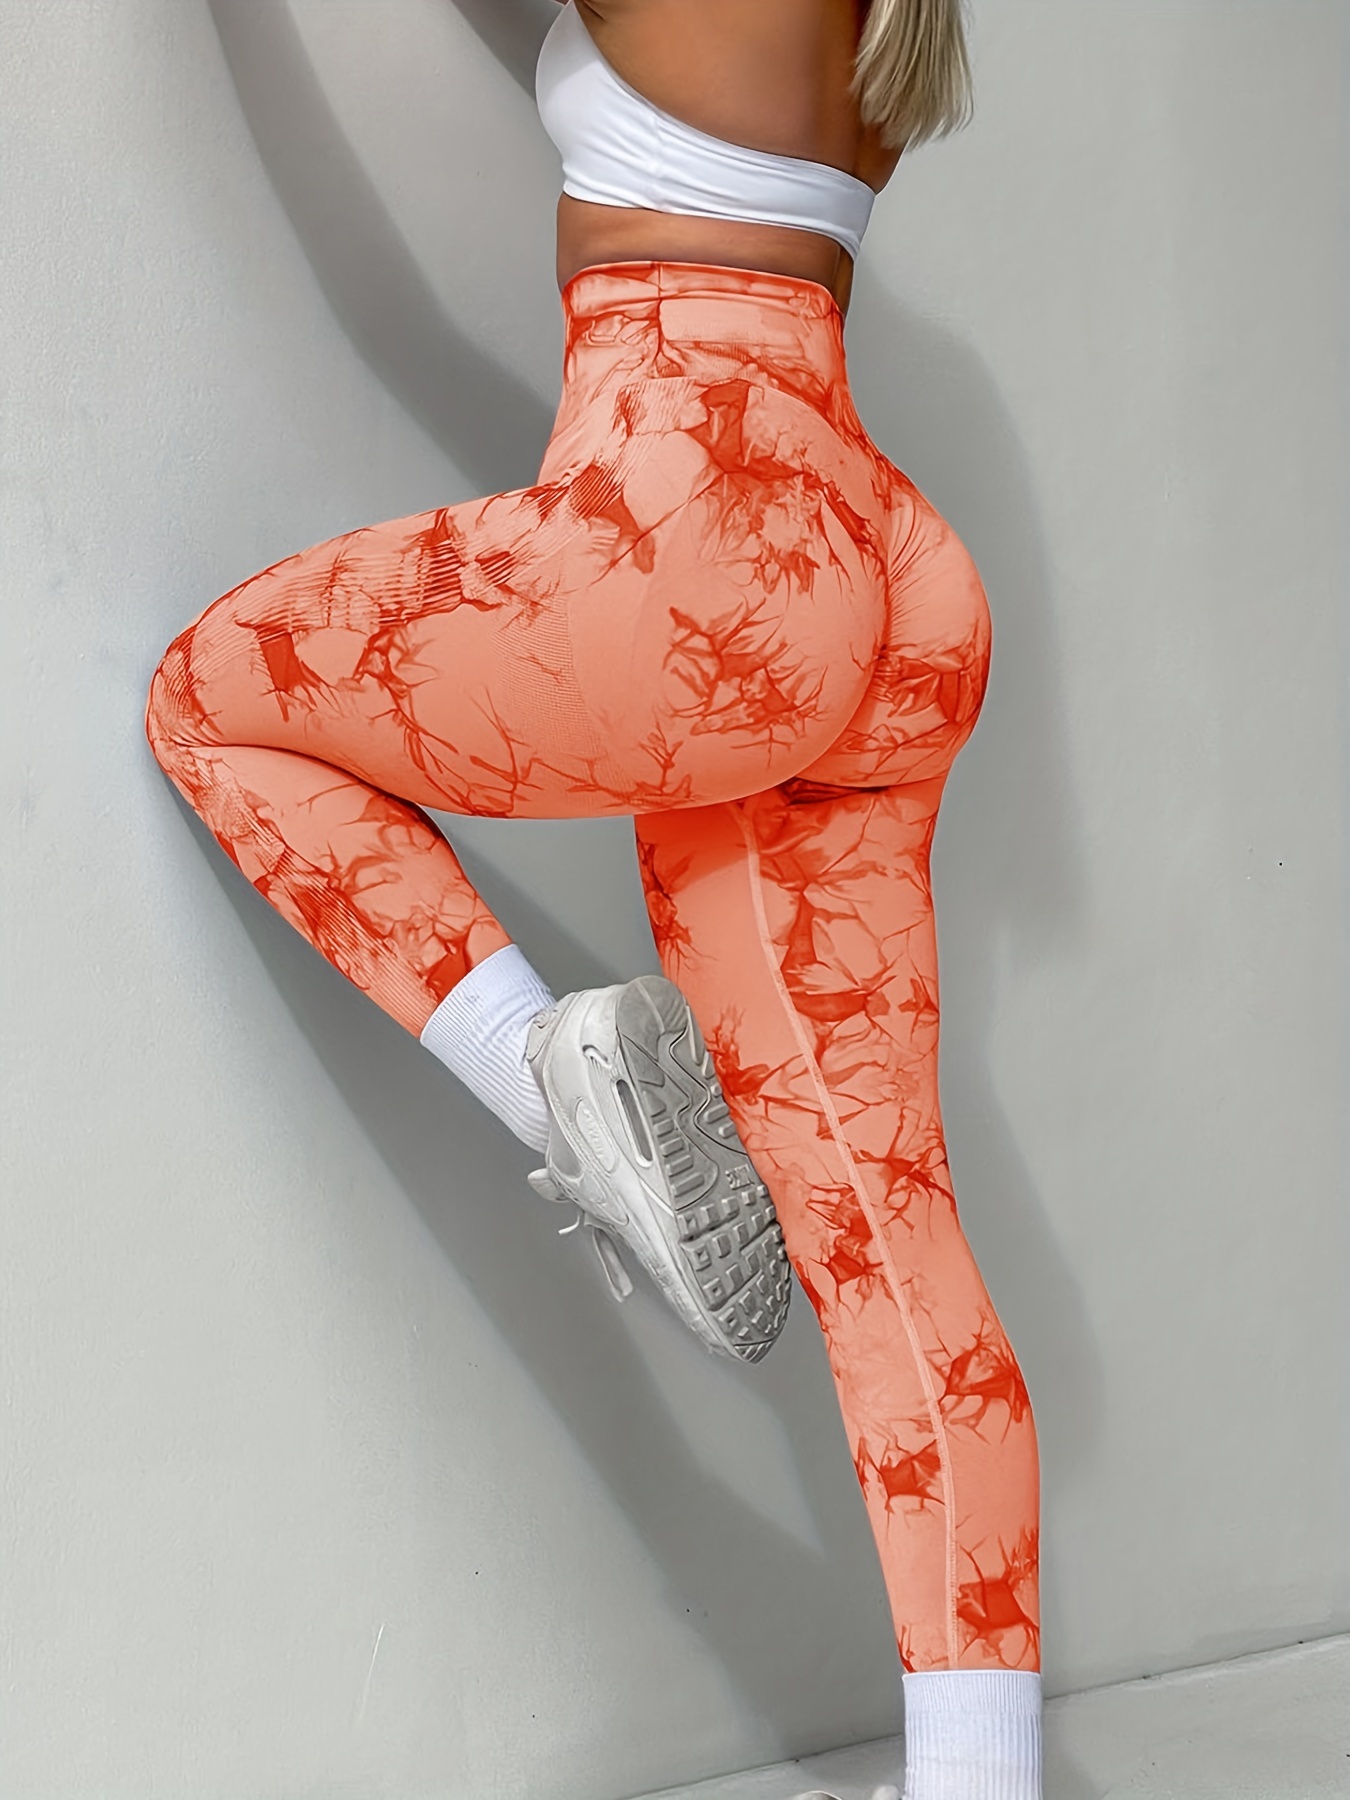 Burnt Orange Yoga Leggings Women, Ombre Tie Dye Fall Autumn High Waisted  Pants Cute Printed Workout Gym Designer Tights -  Canada